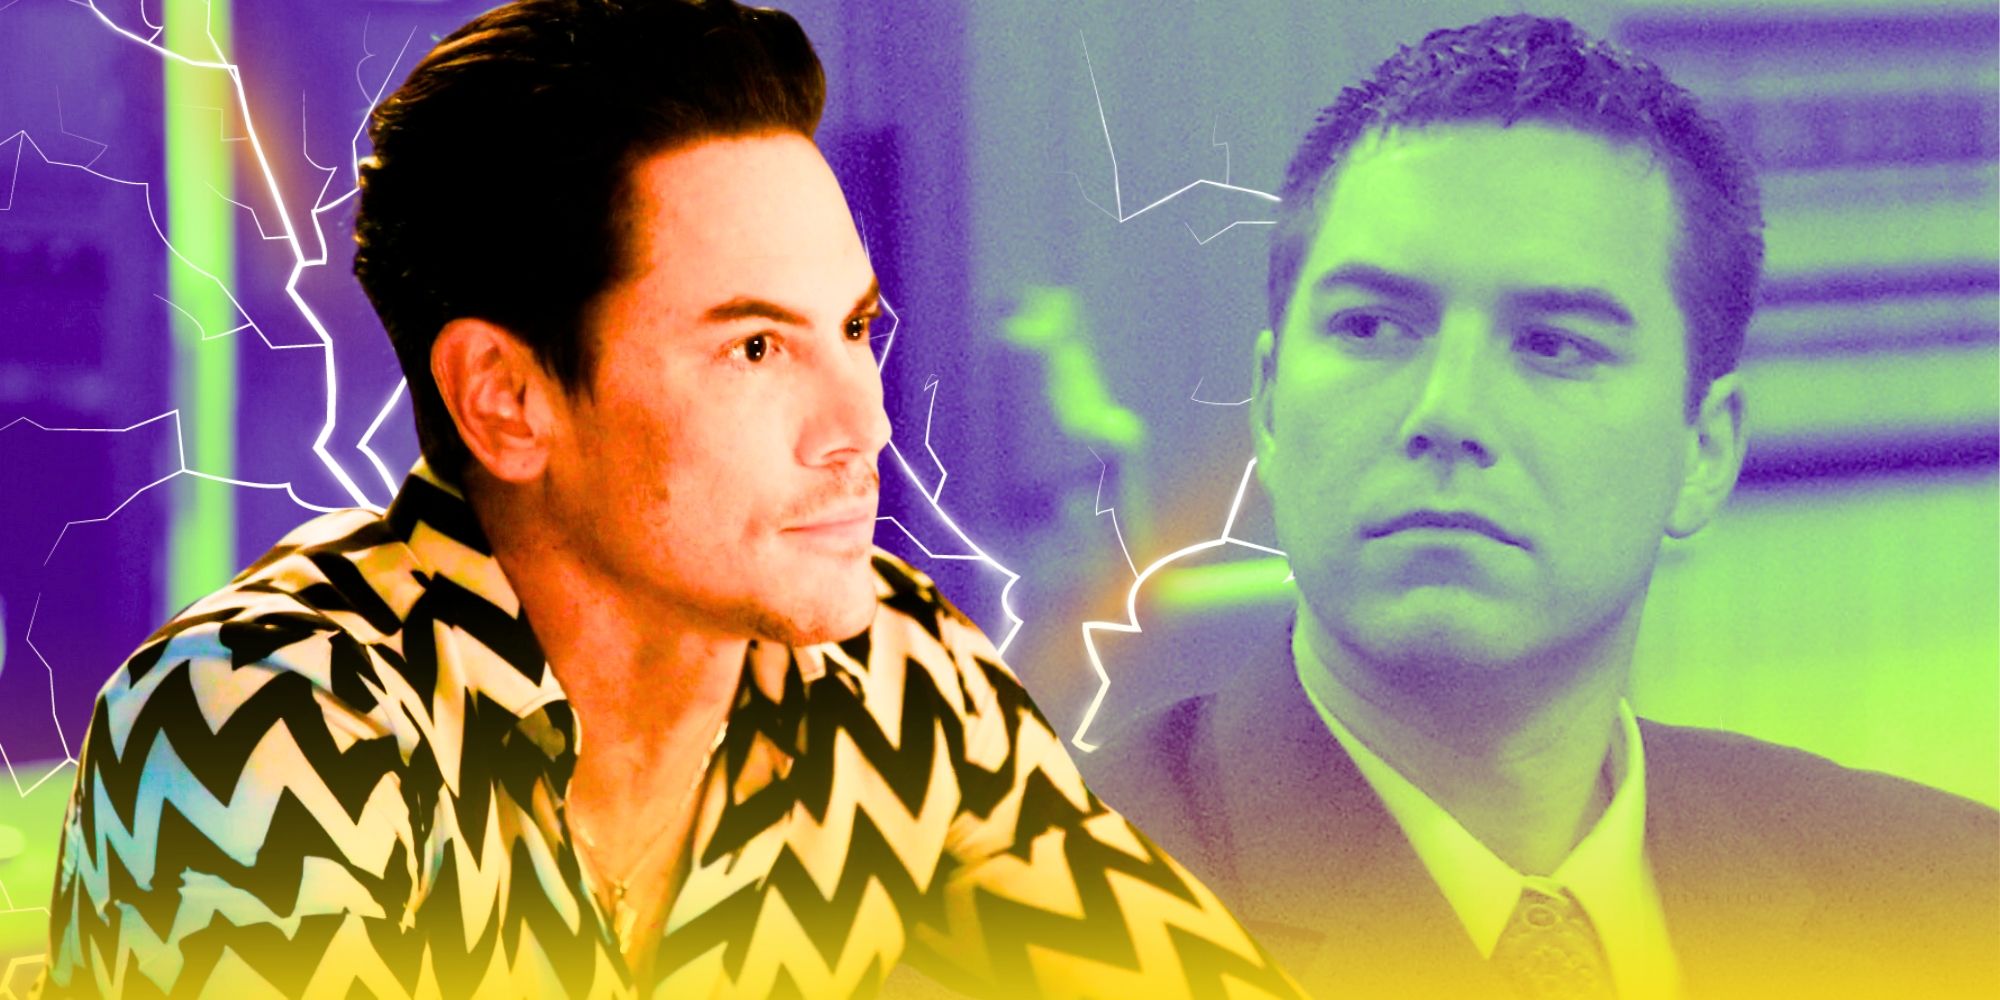 Vanderpump Rules's Tom Sandoval and Scott Peterson, both with no expressions